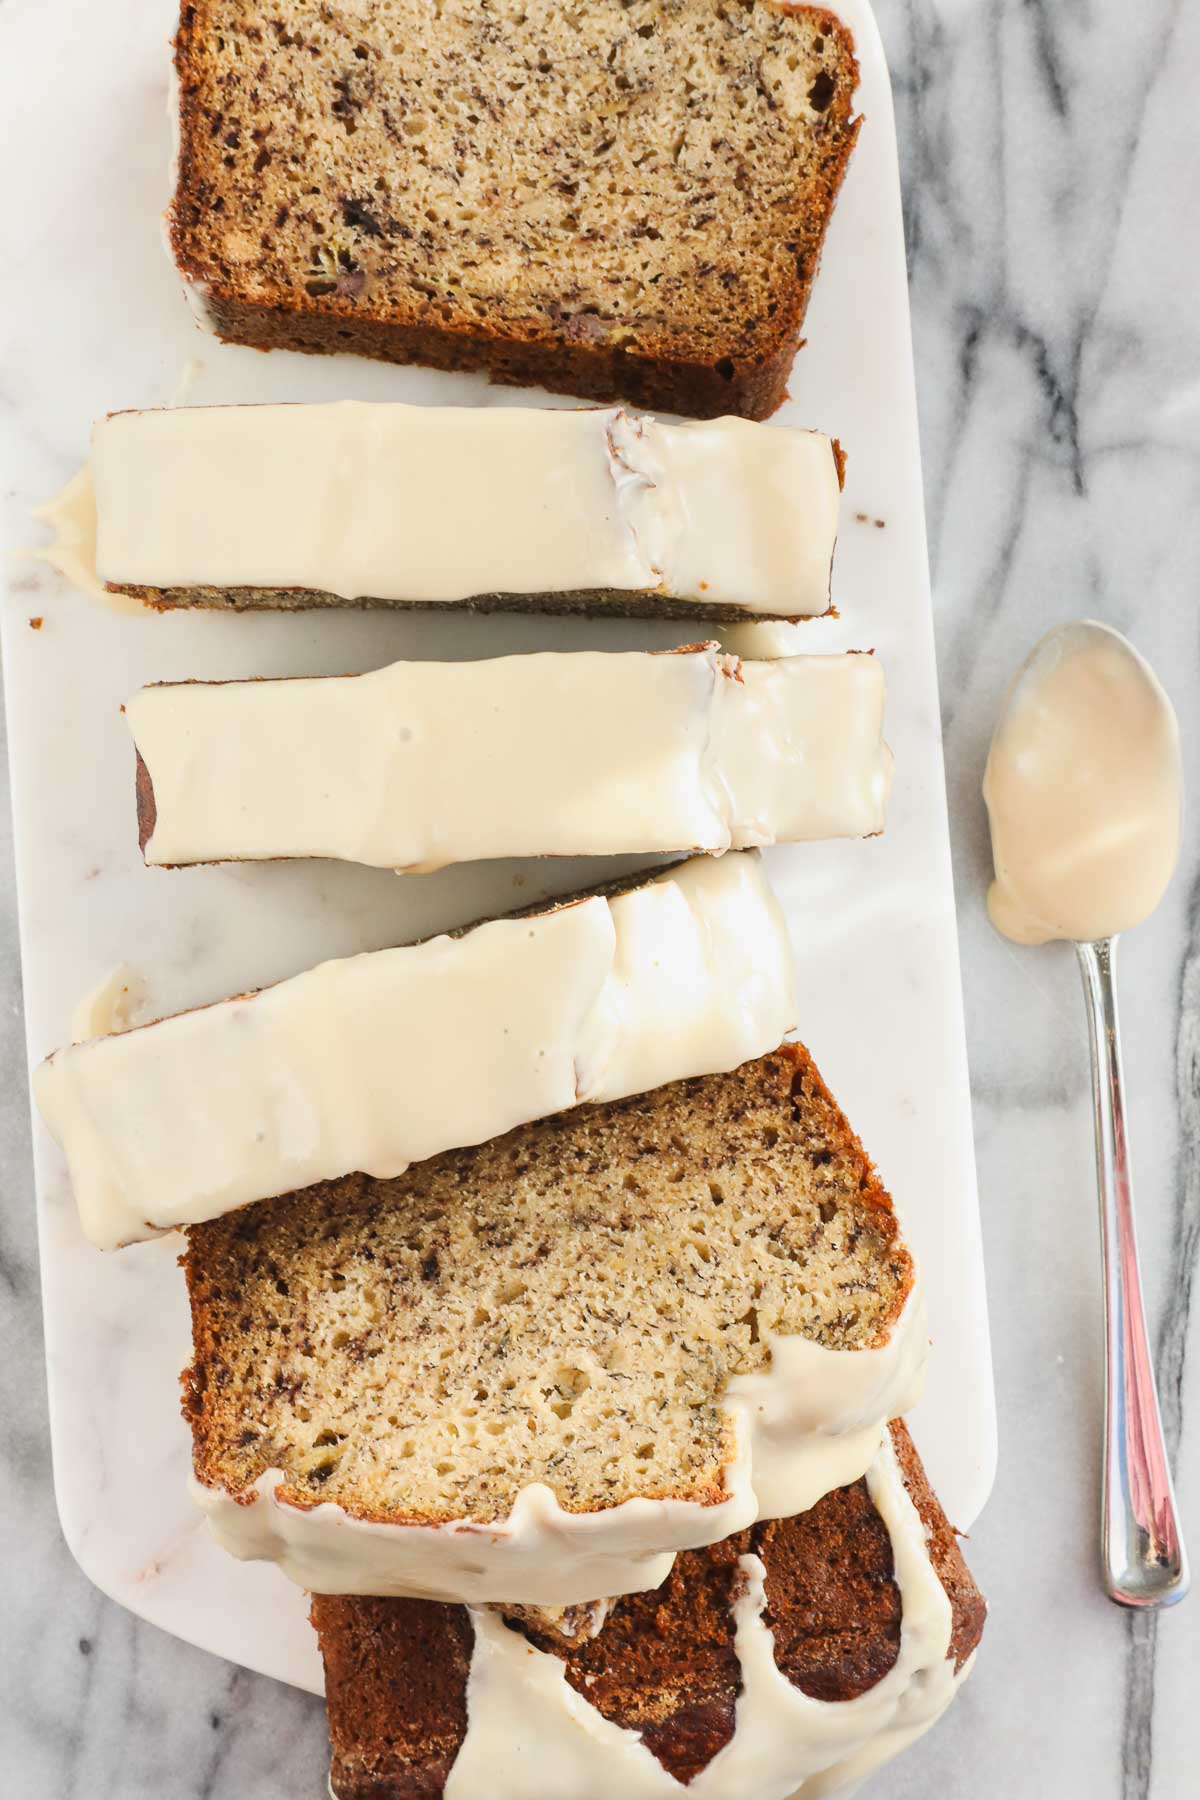 Thick slices of banana bread covered in a white maple glaze on a light background.